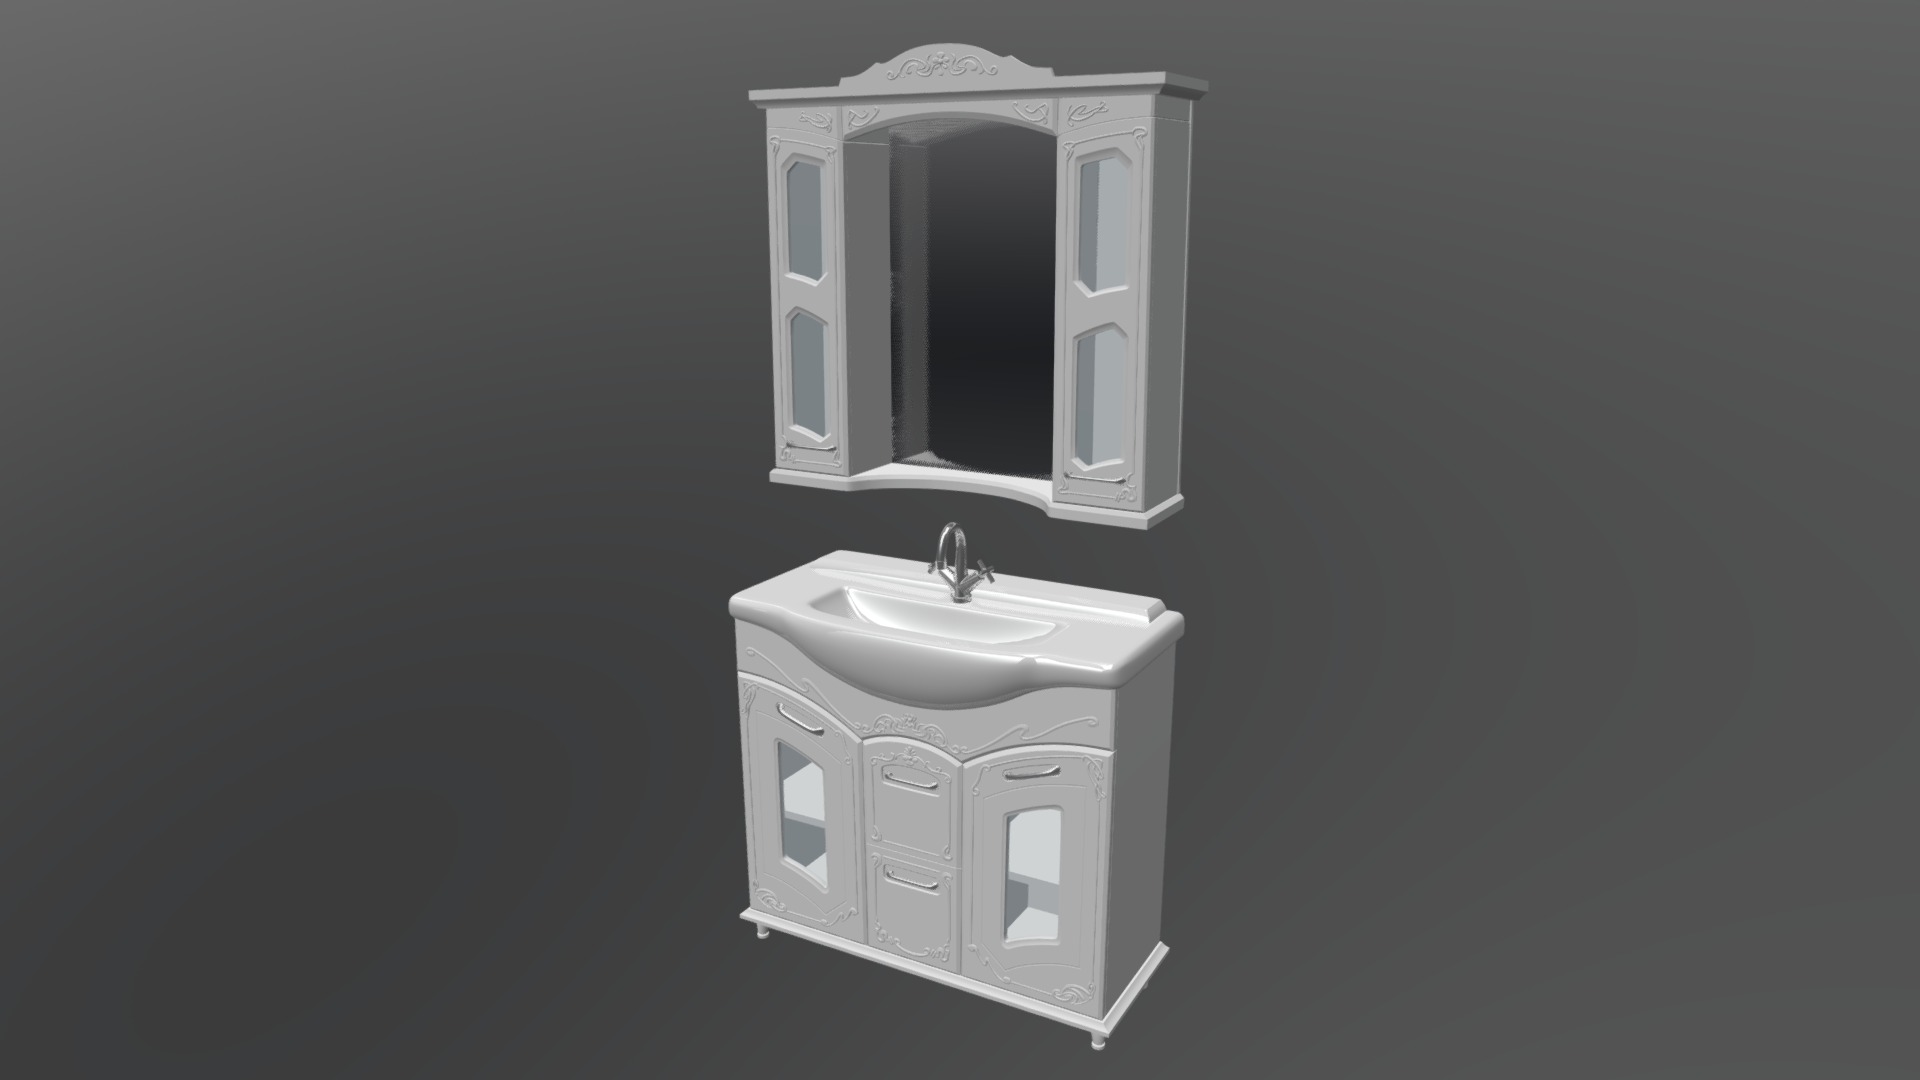 3D model Bathroom Fittings - This is a 3D model of the Bathroom Fittings. The 3D model is about a sink and a faucet.